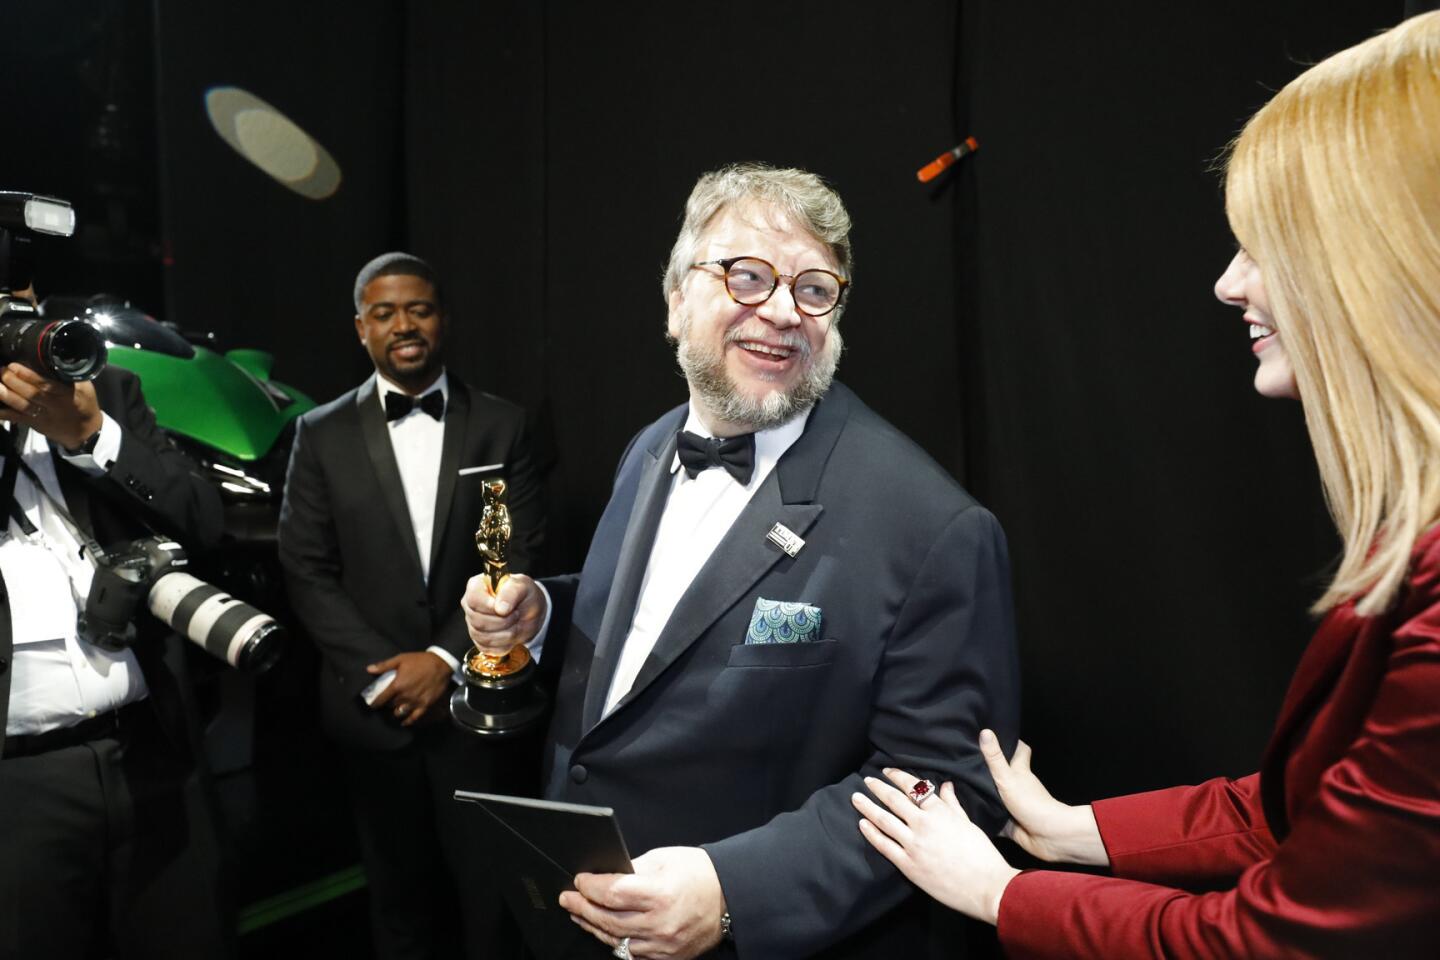 Guillermo del Toro after winning for best director and presenter Emma Stone backstage at the 90th Academy Awards on Sunday at the Dolby Theatre in Hollywood.